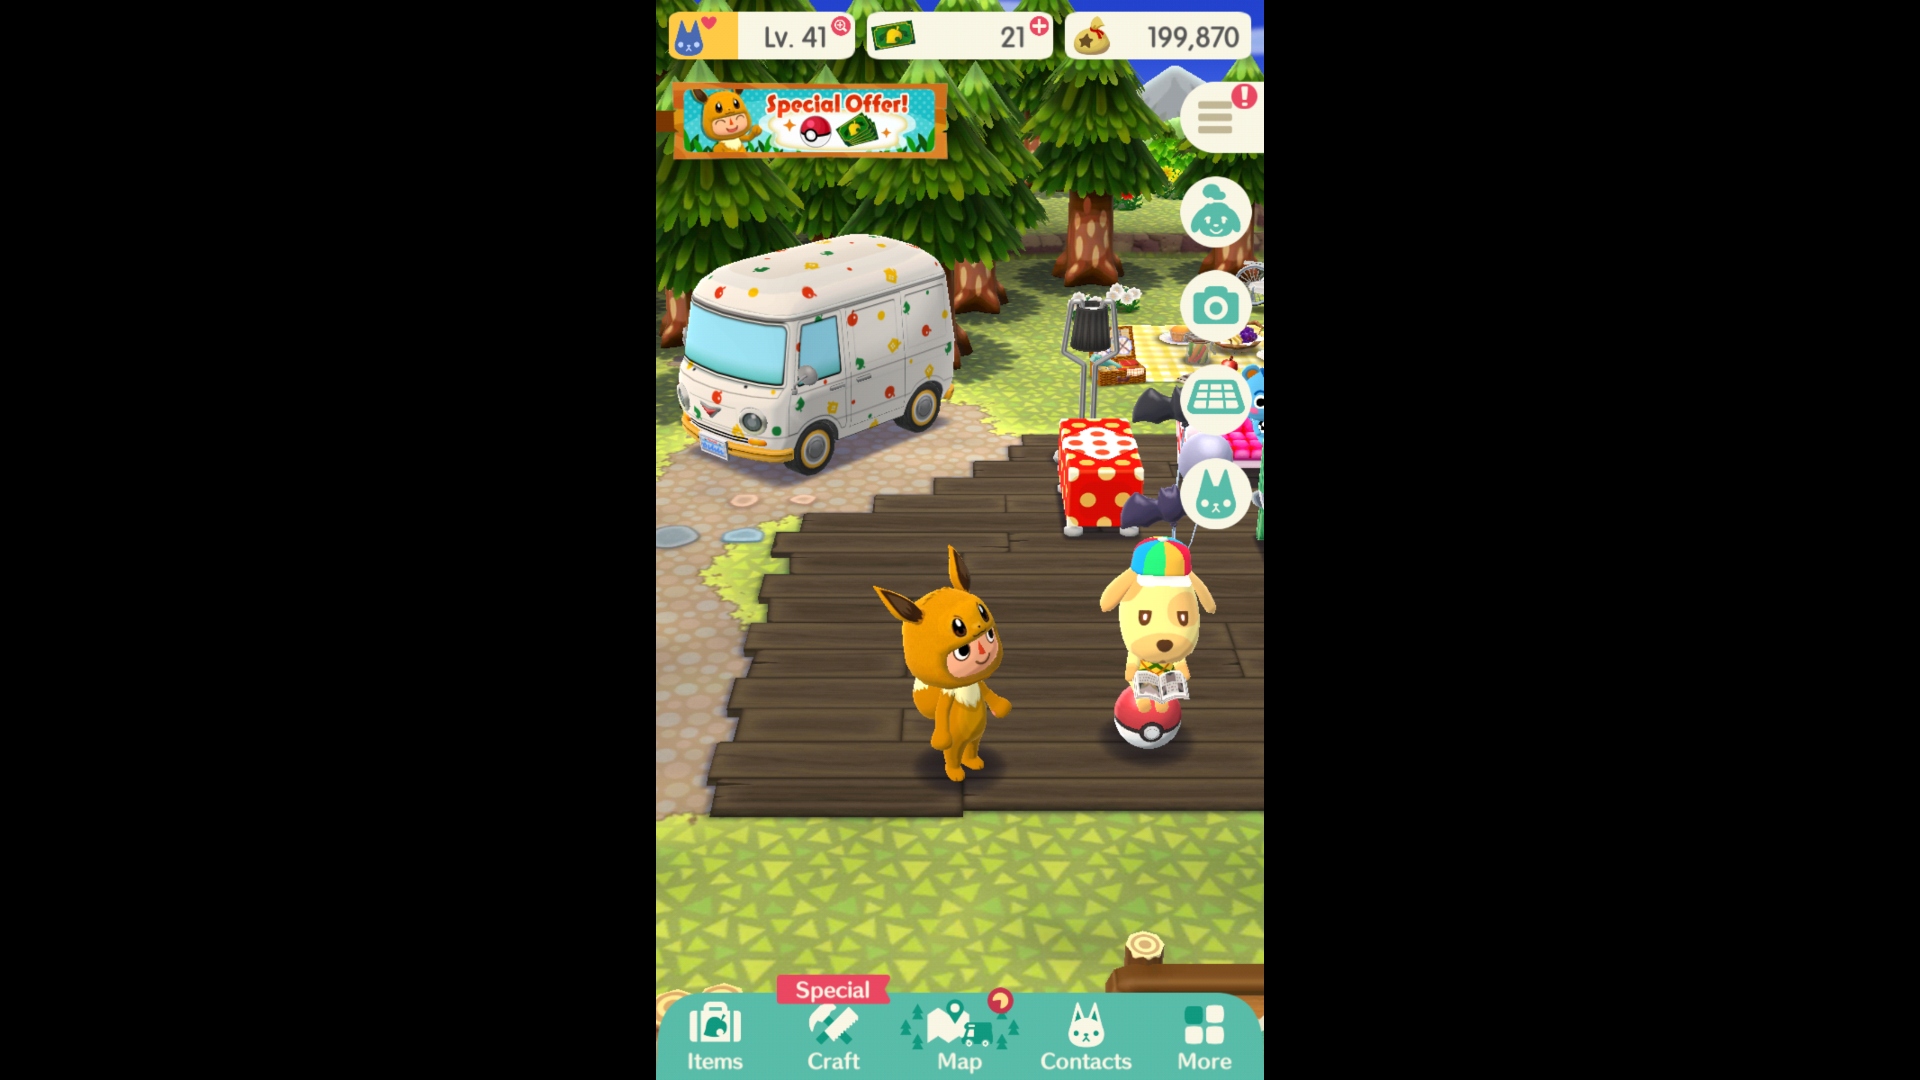 Best farm games - image shows an Animal Crossing villager standing in a campsite beside a dog village in Animal Crossing: Pocket Camp. They are dressed as the Pokemon Eevee.